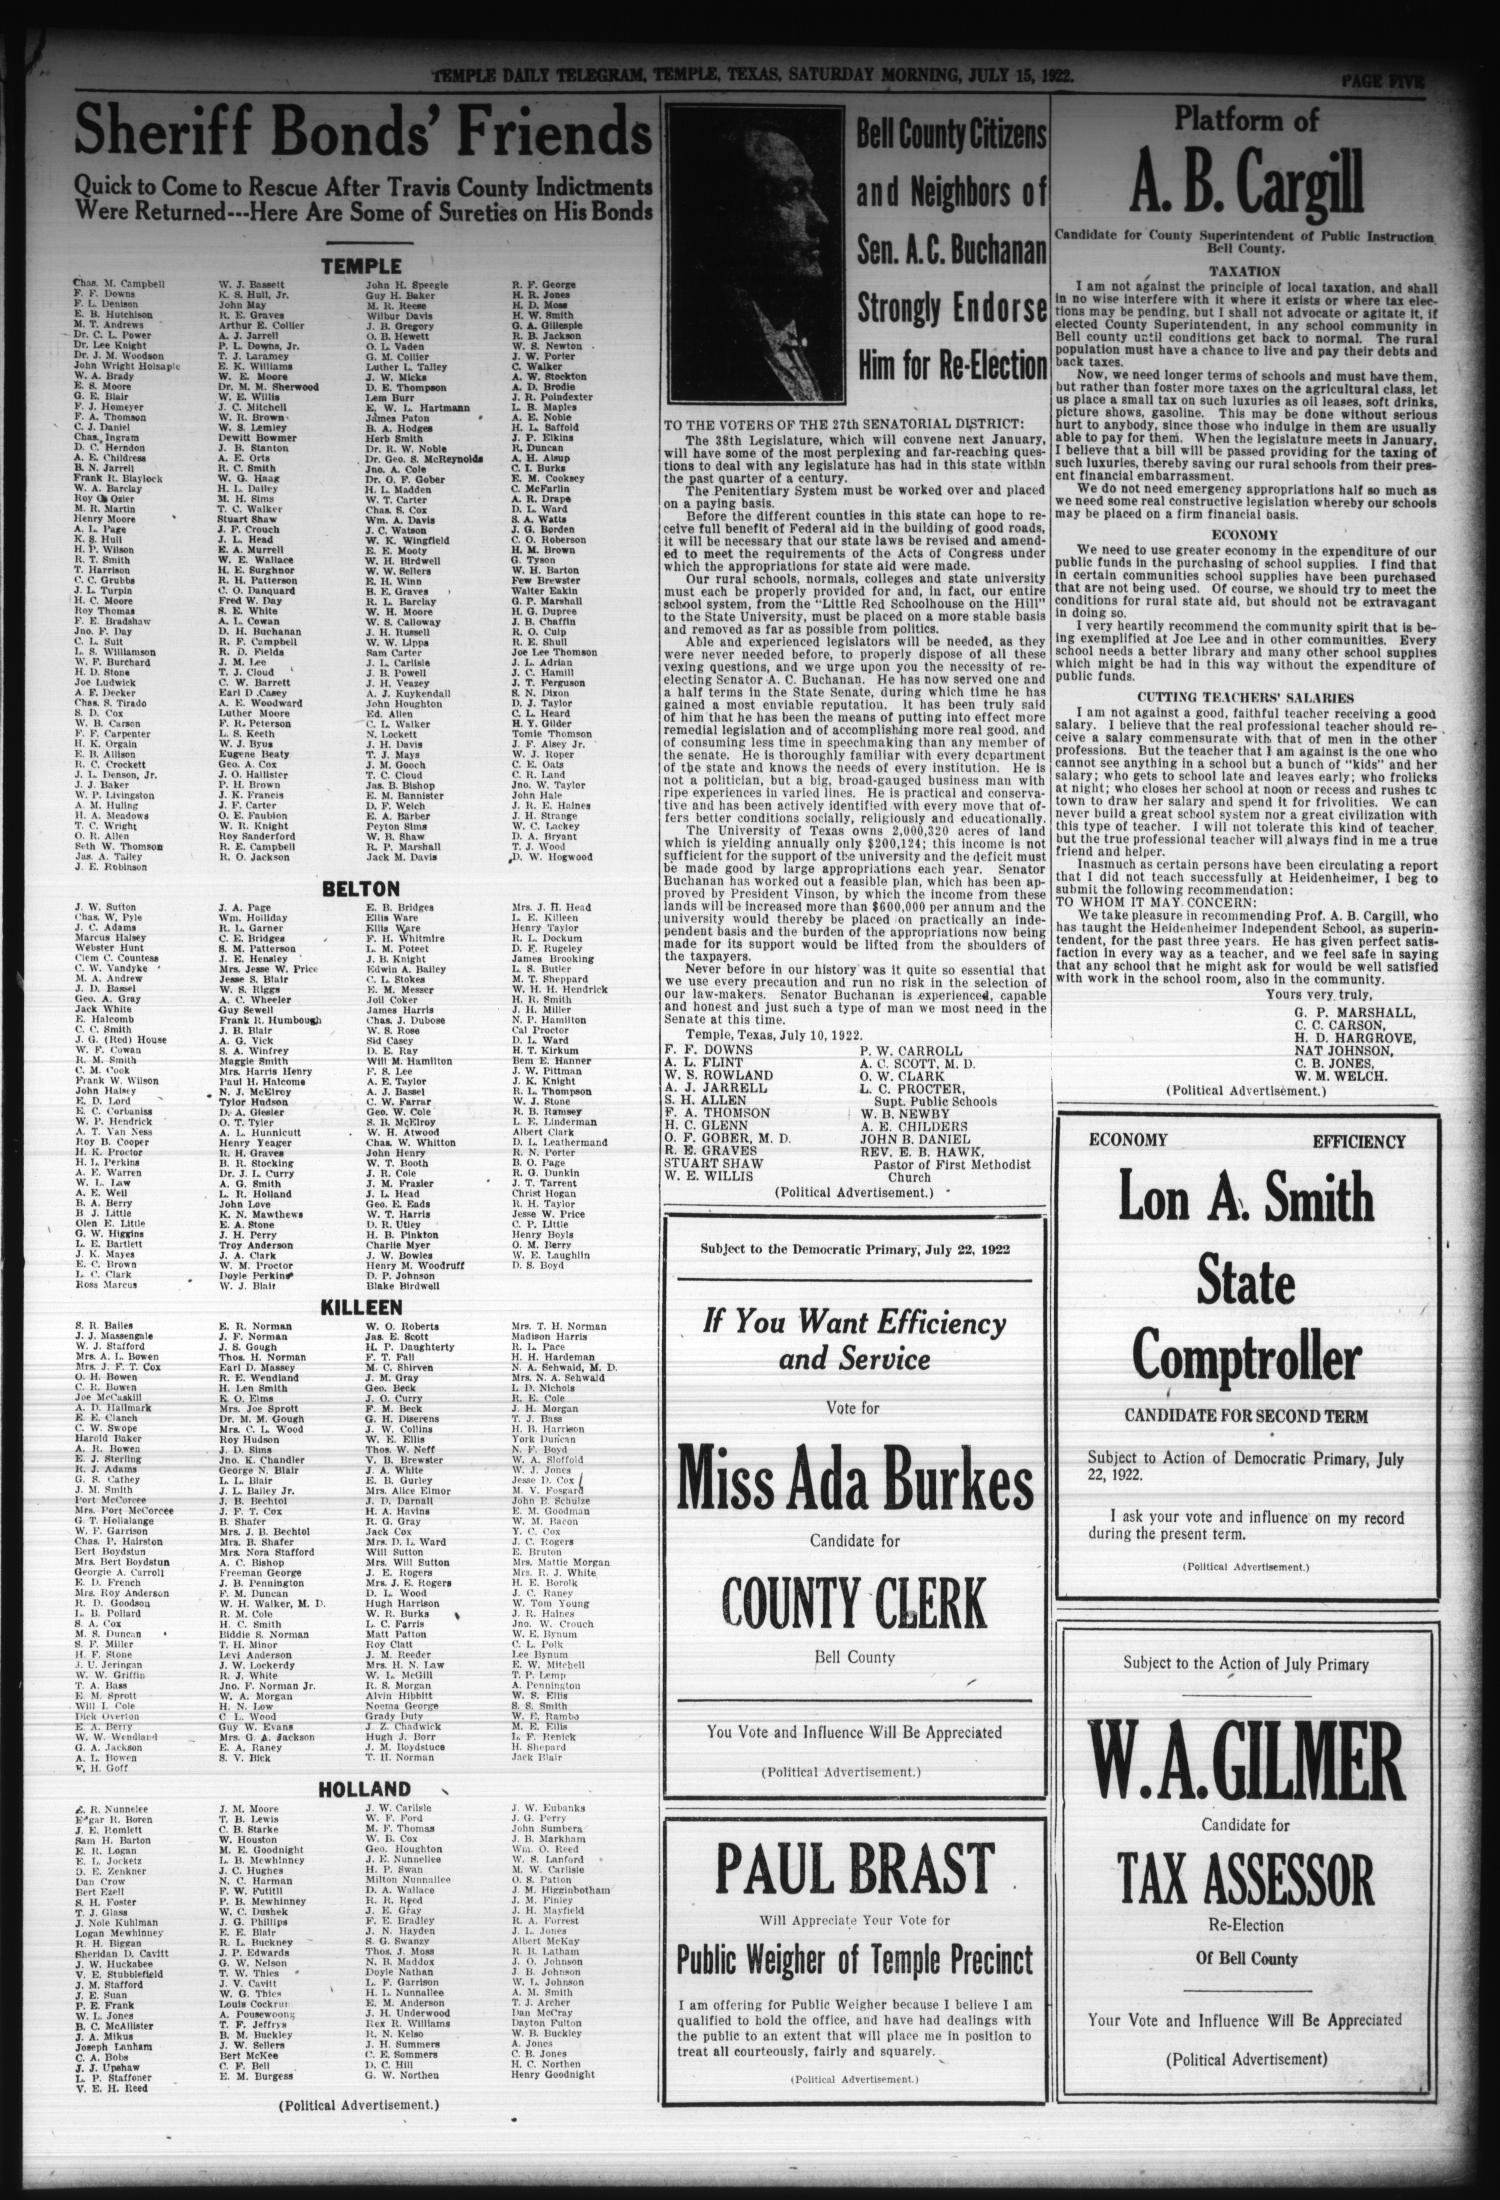 Temple Daily Telegram Temple Tex Vol 15 No 5 Ed 1 Saturday July 15 1922 Page 5 Of 8 The Portal To Texas History